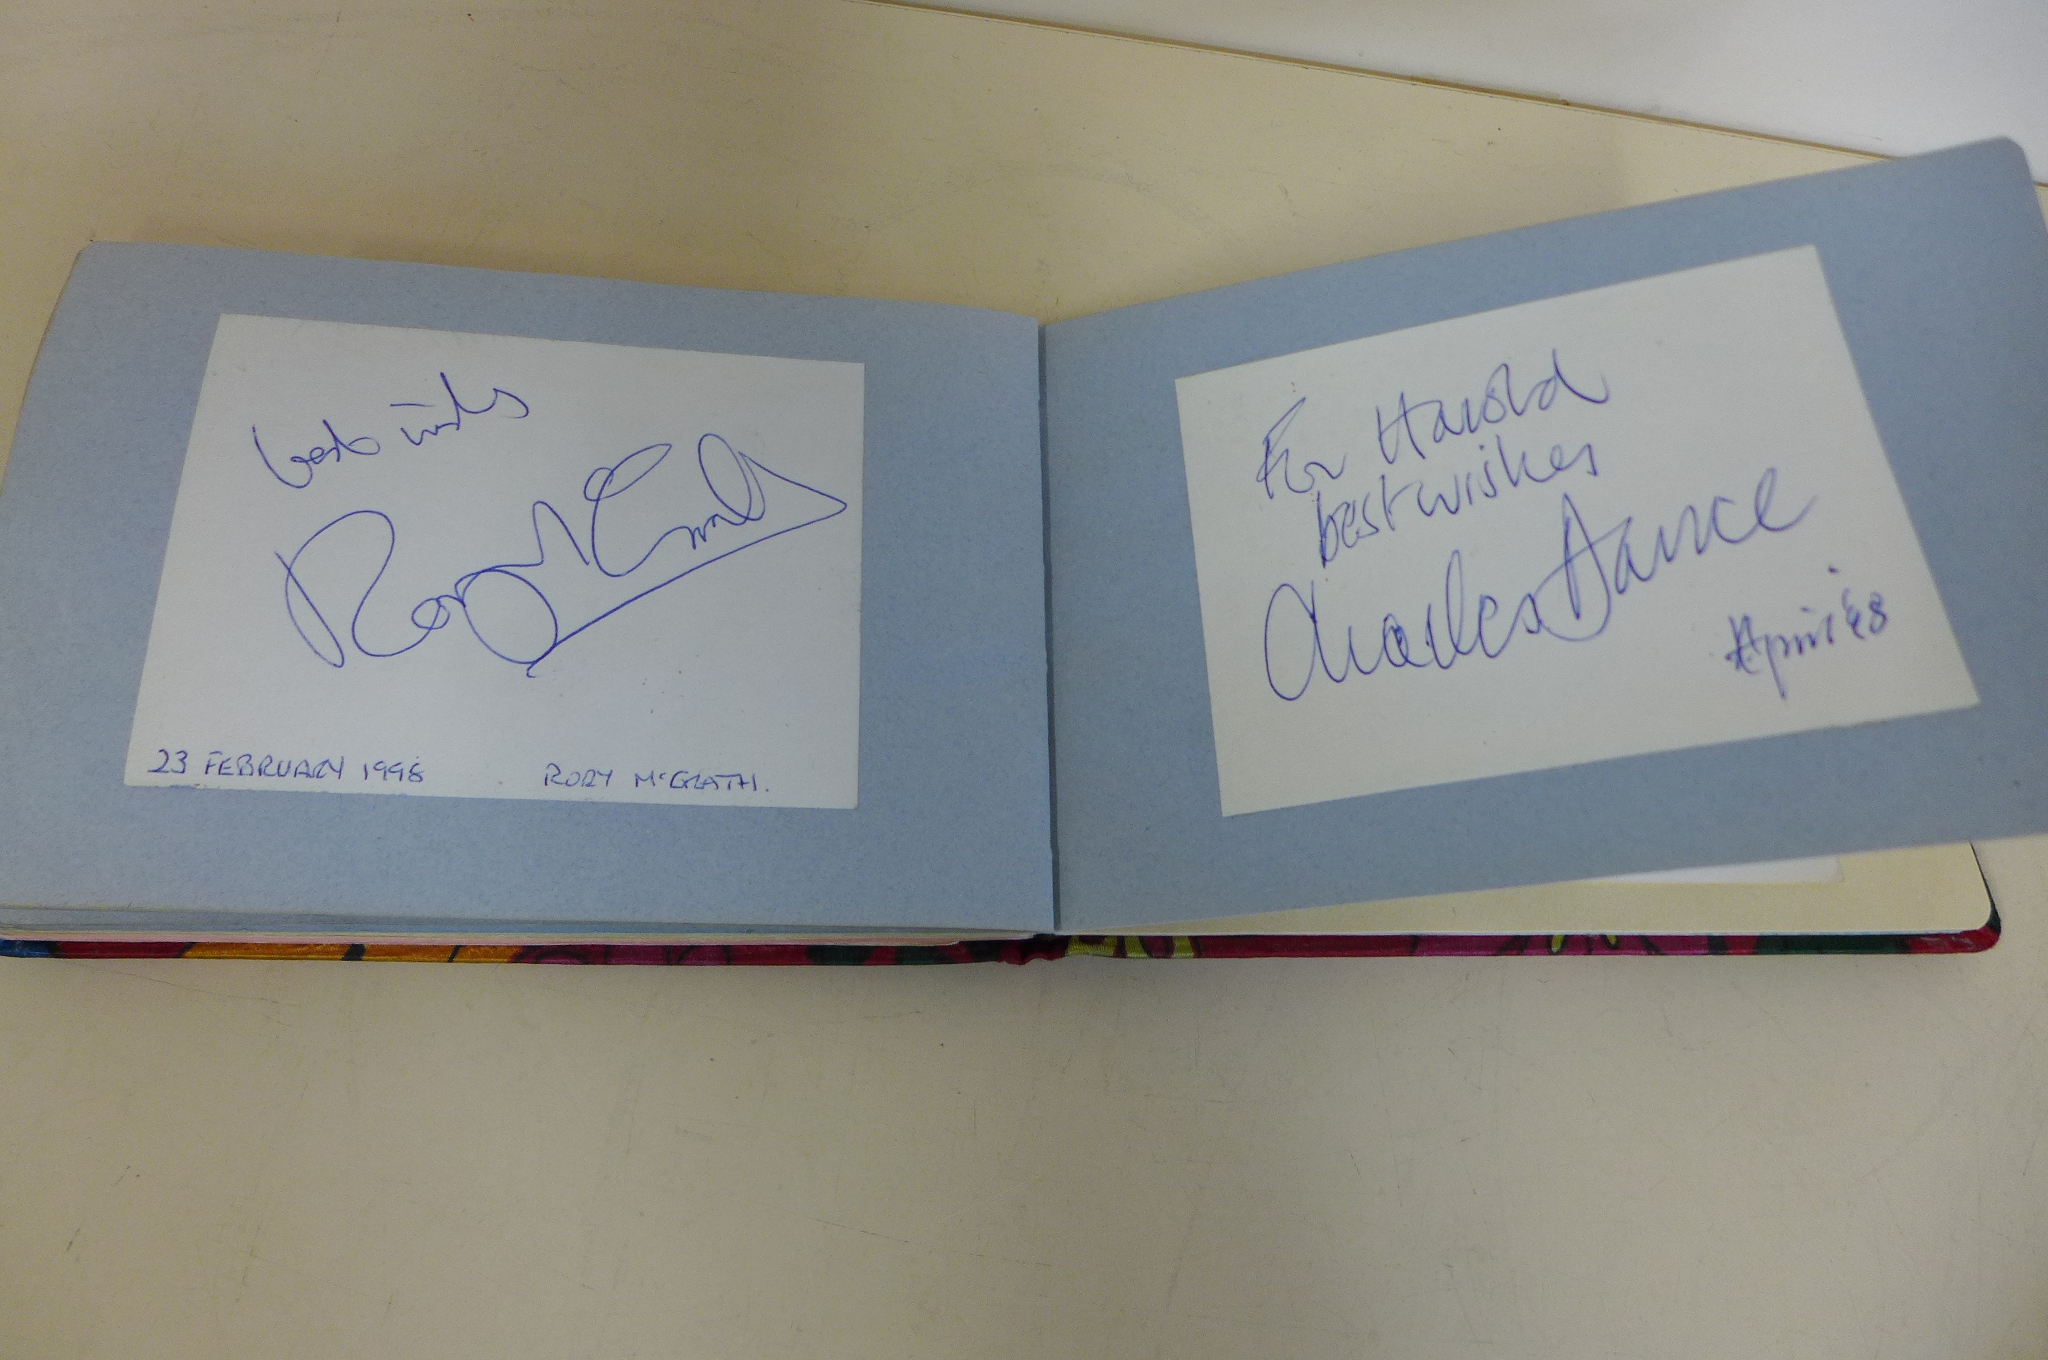 An interesting autograph book with autographs, including Topol, Christopher Lee, Ava Gardner, - Image 11 of 11